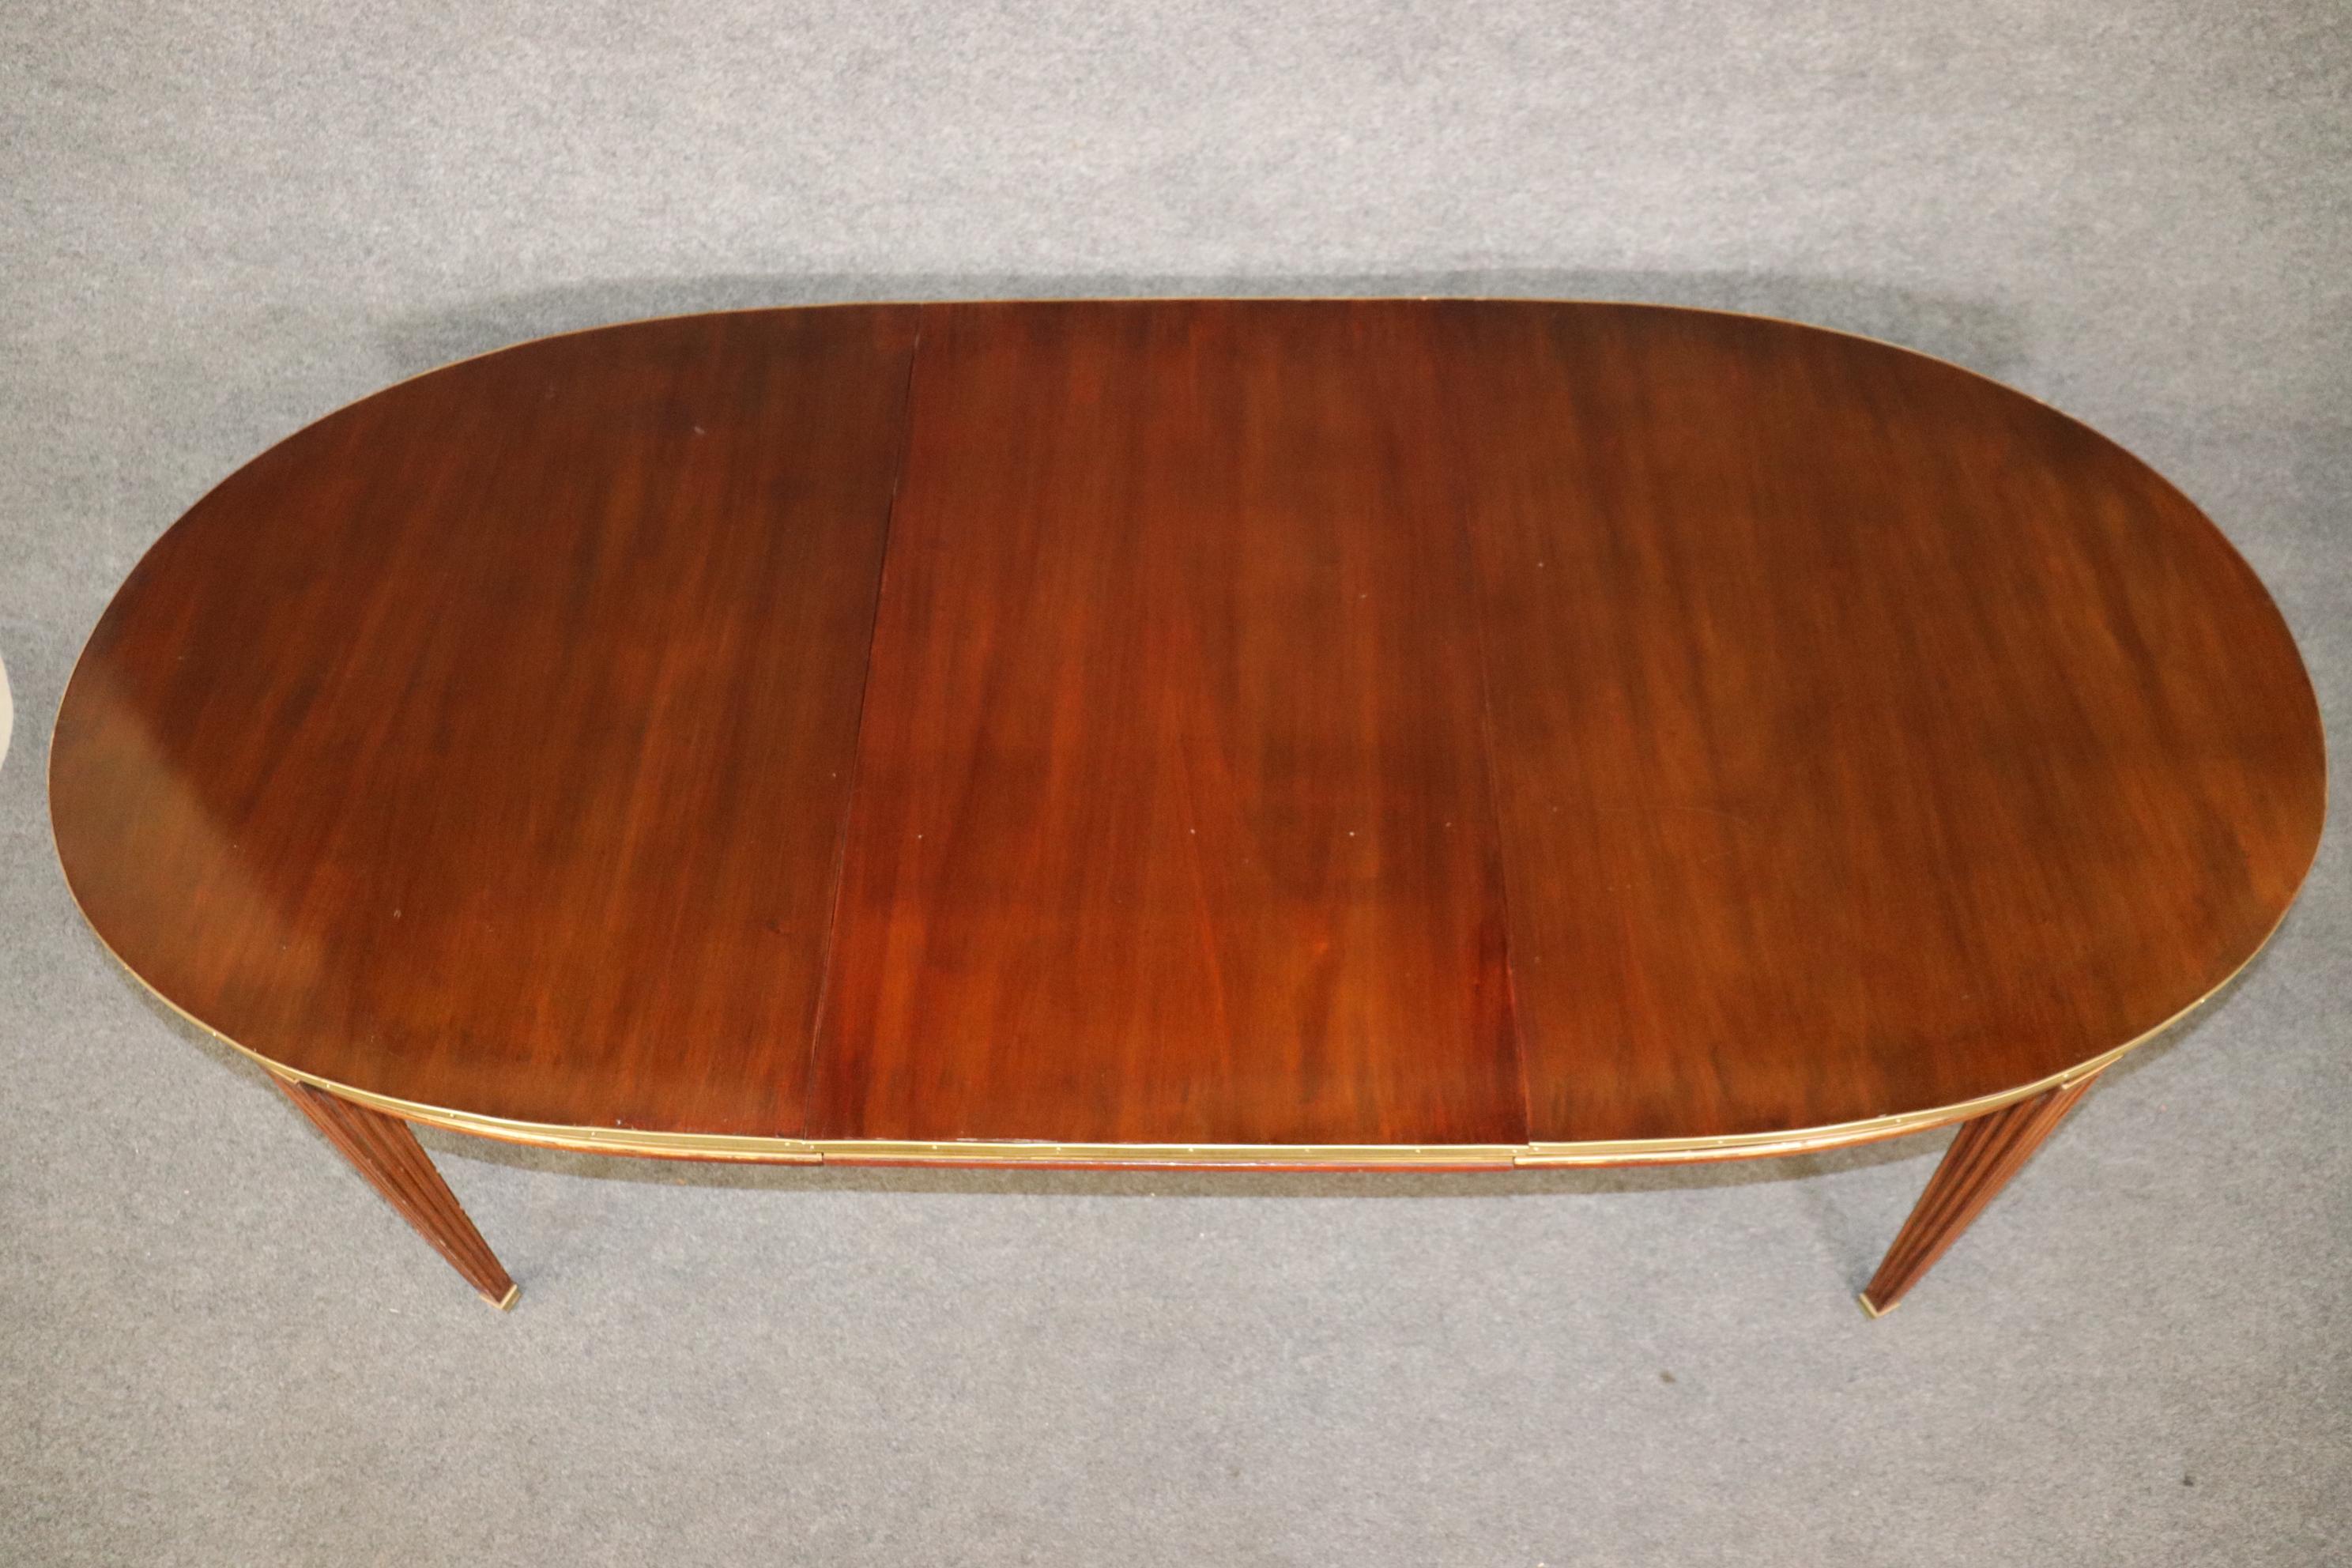 20th Century Louis XVI Directoire Style Maison Jansen Dining Room Table with 1 Leaf